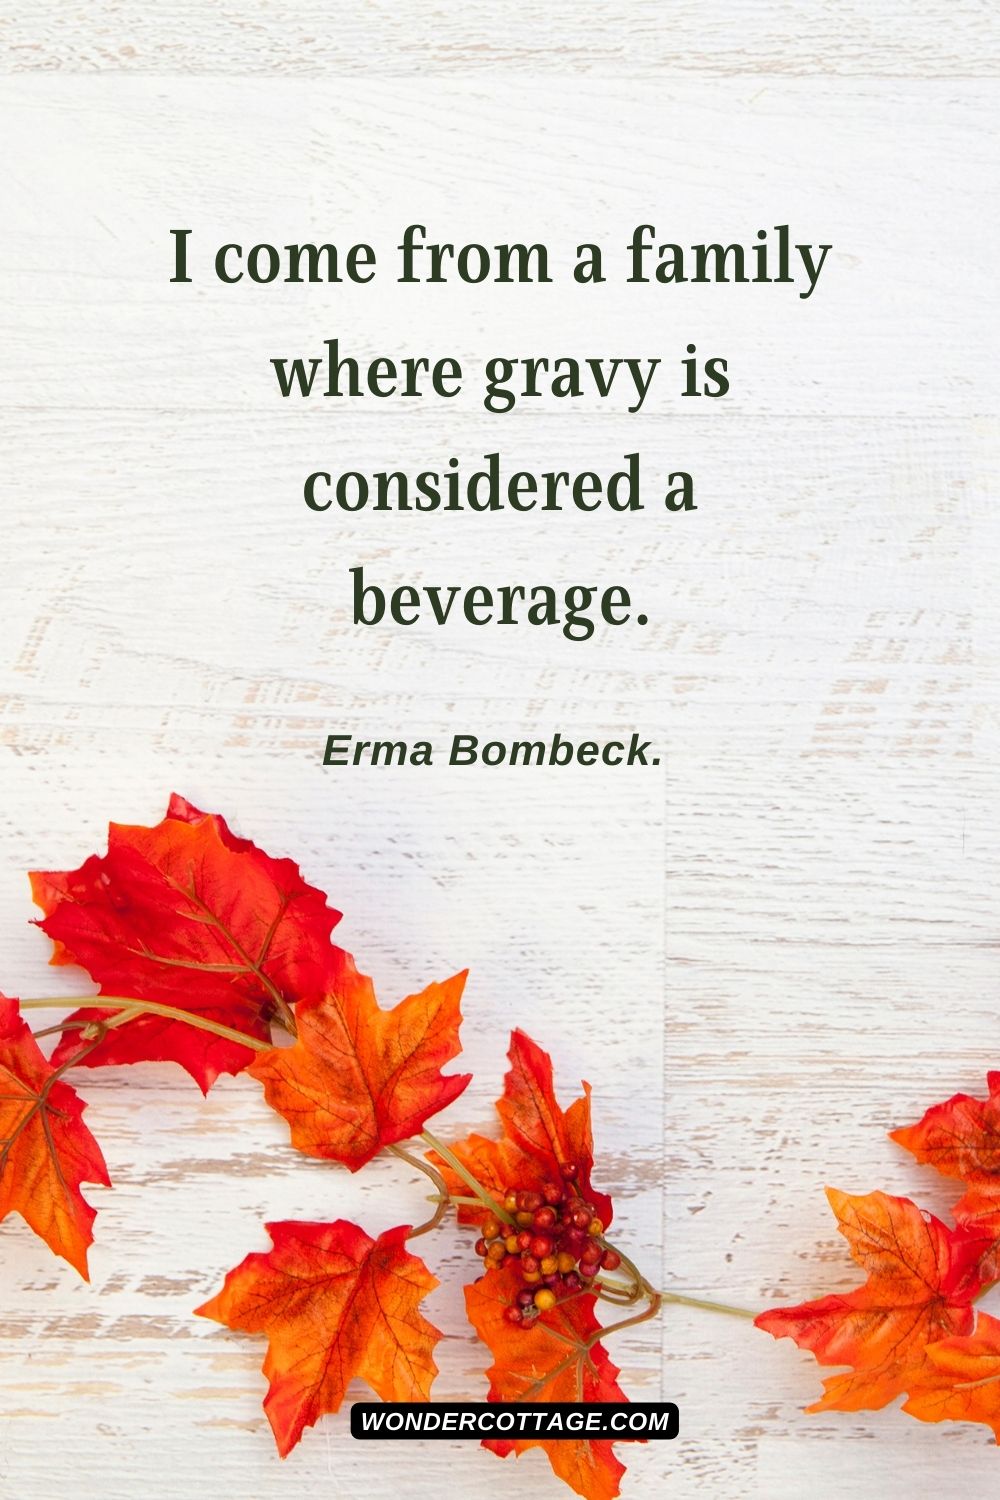 I come from a family where gravy is considered a beverage. Erma Bombeck.